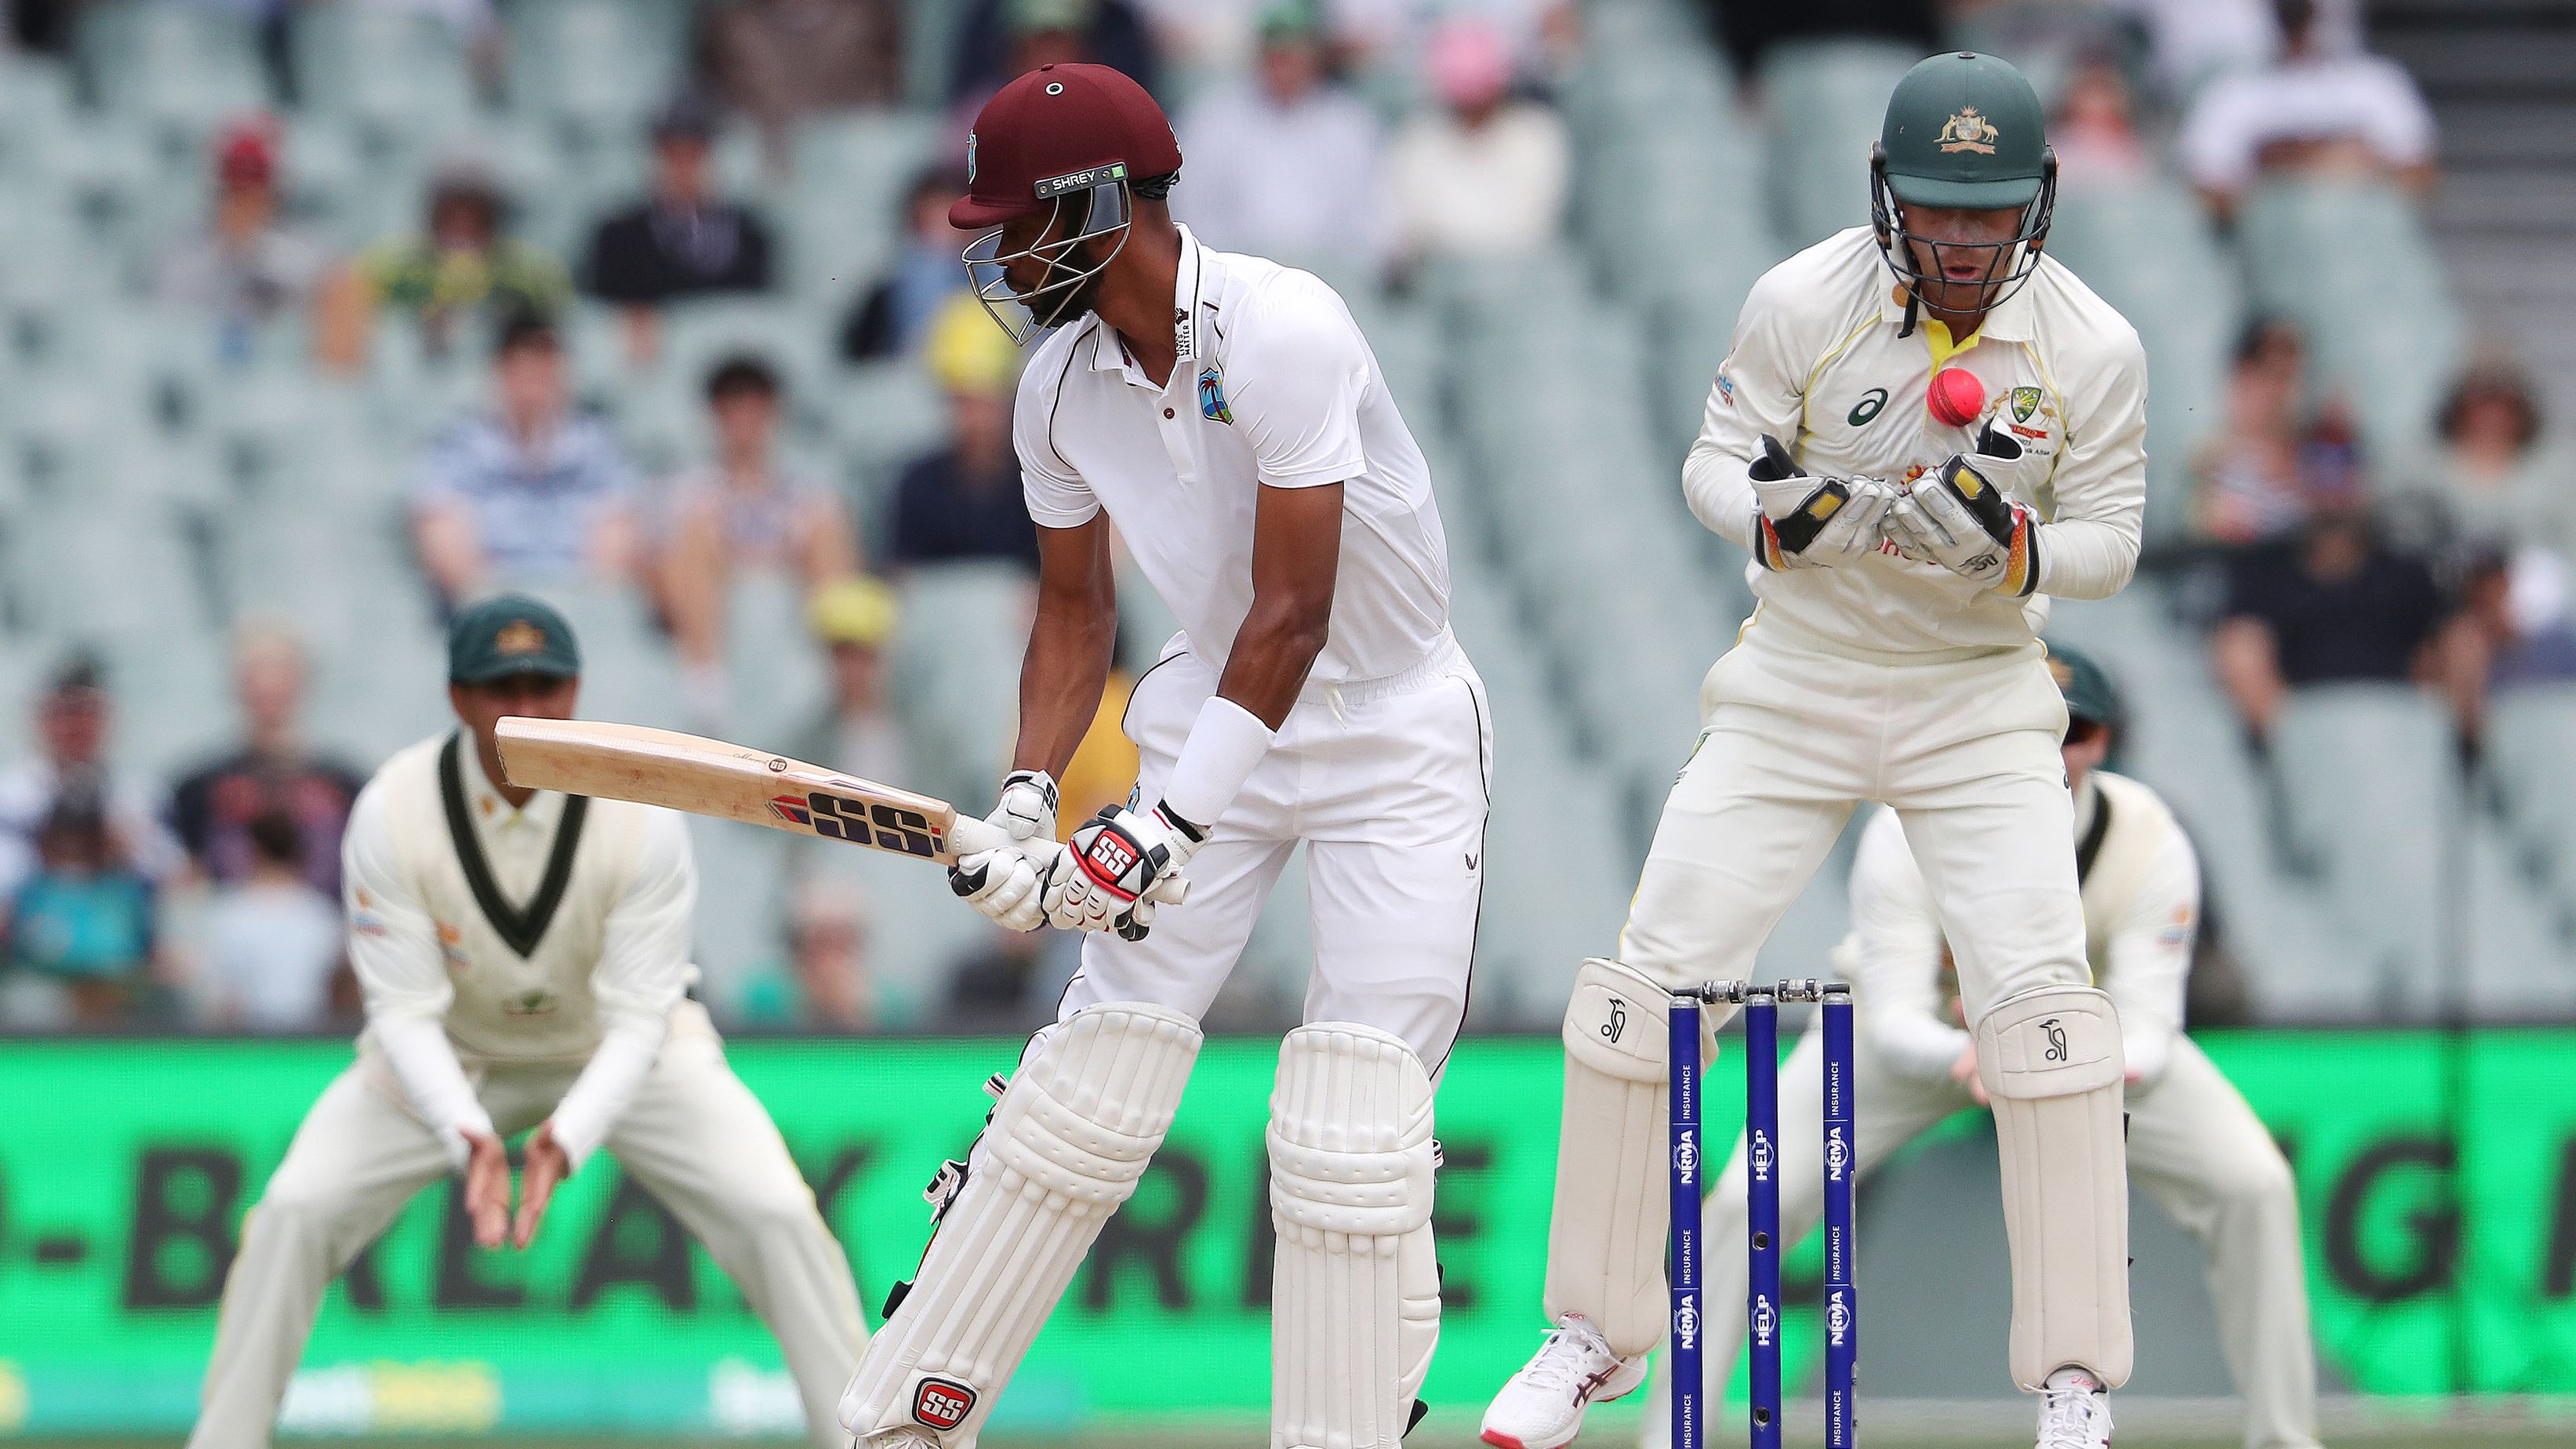 Roston Chase of West Indies is caught out by Alex Carey of Australia at Adelaide Oval. (Photo by Sarah Reed - CA/Cricket Australia via Getty Images)